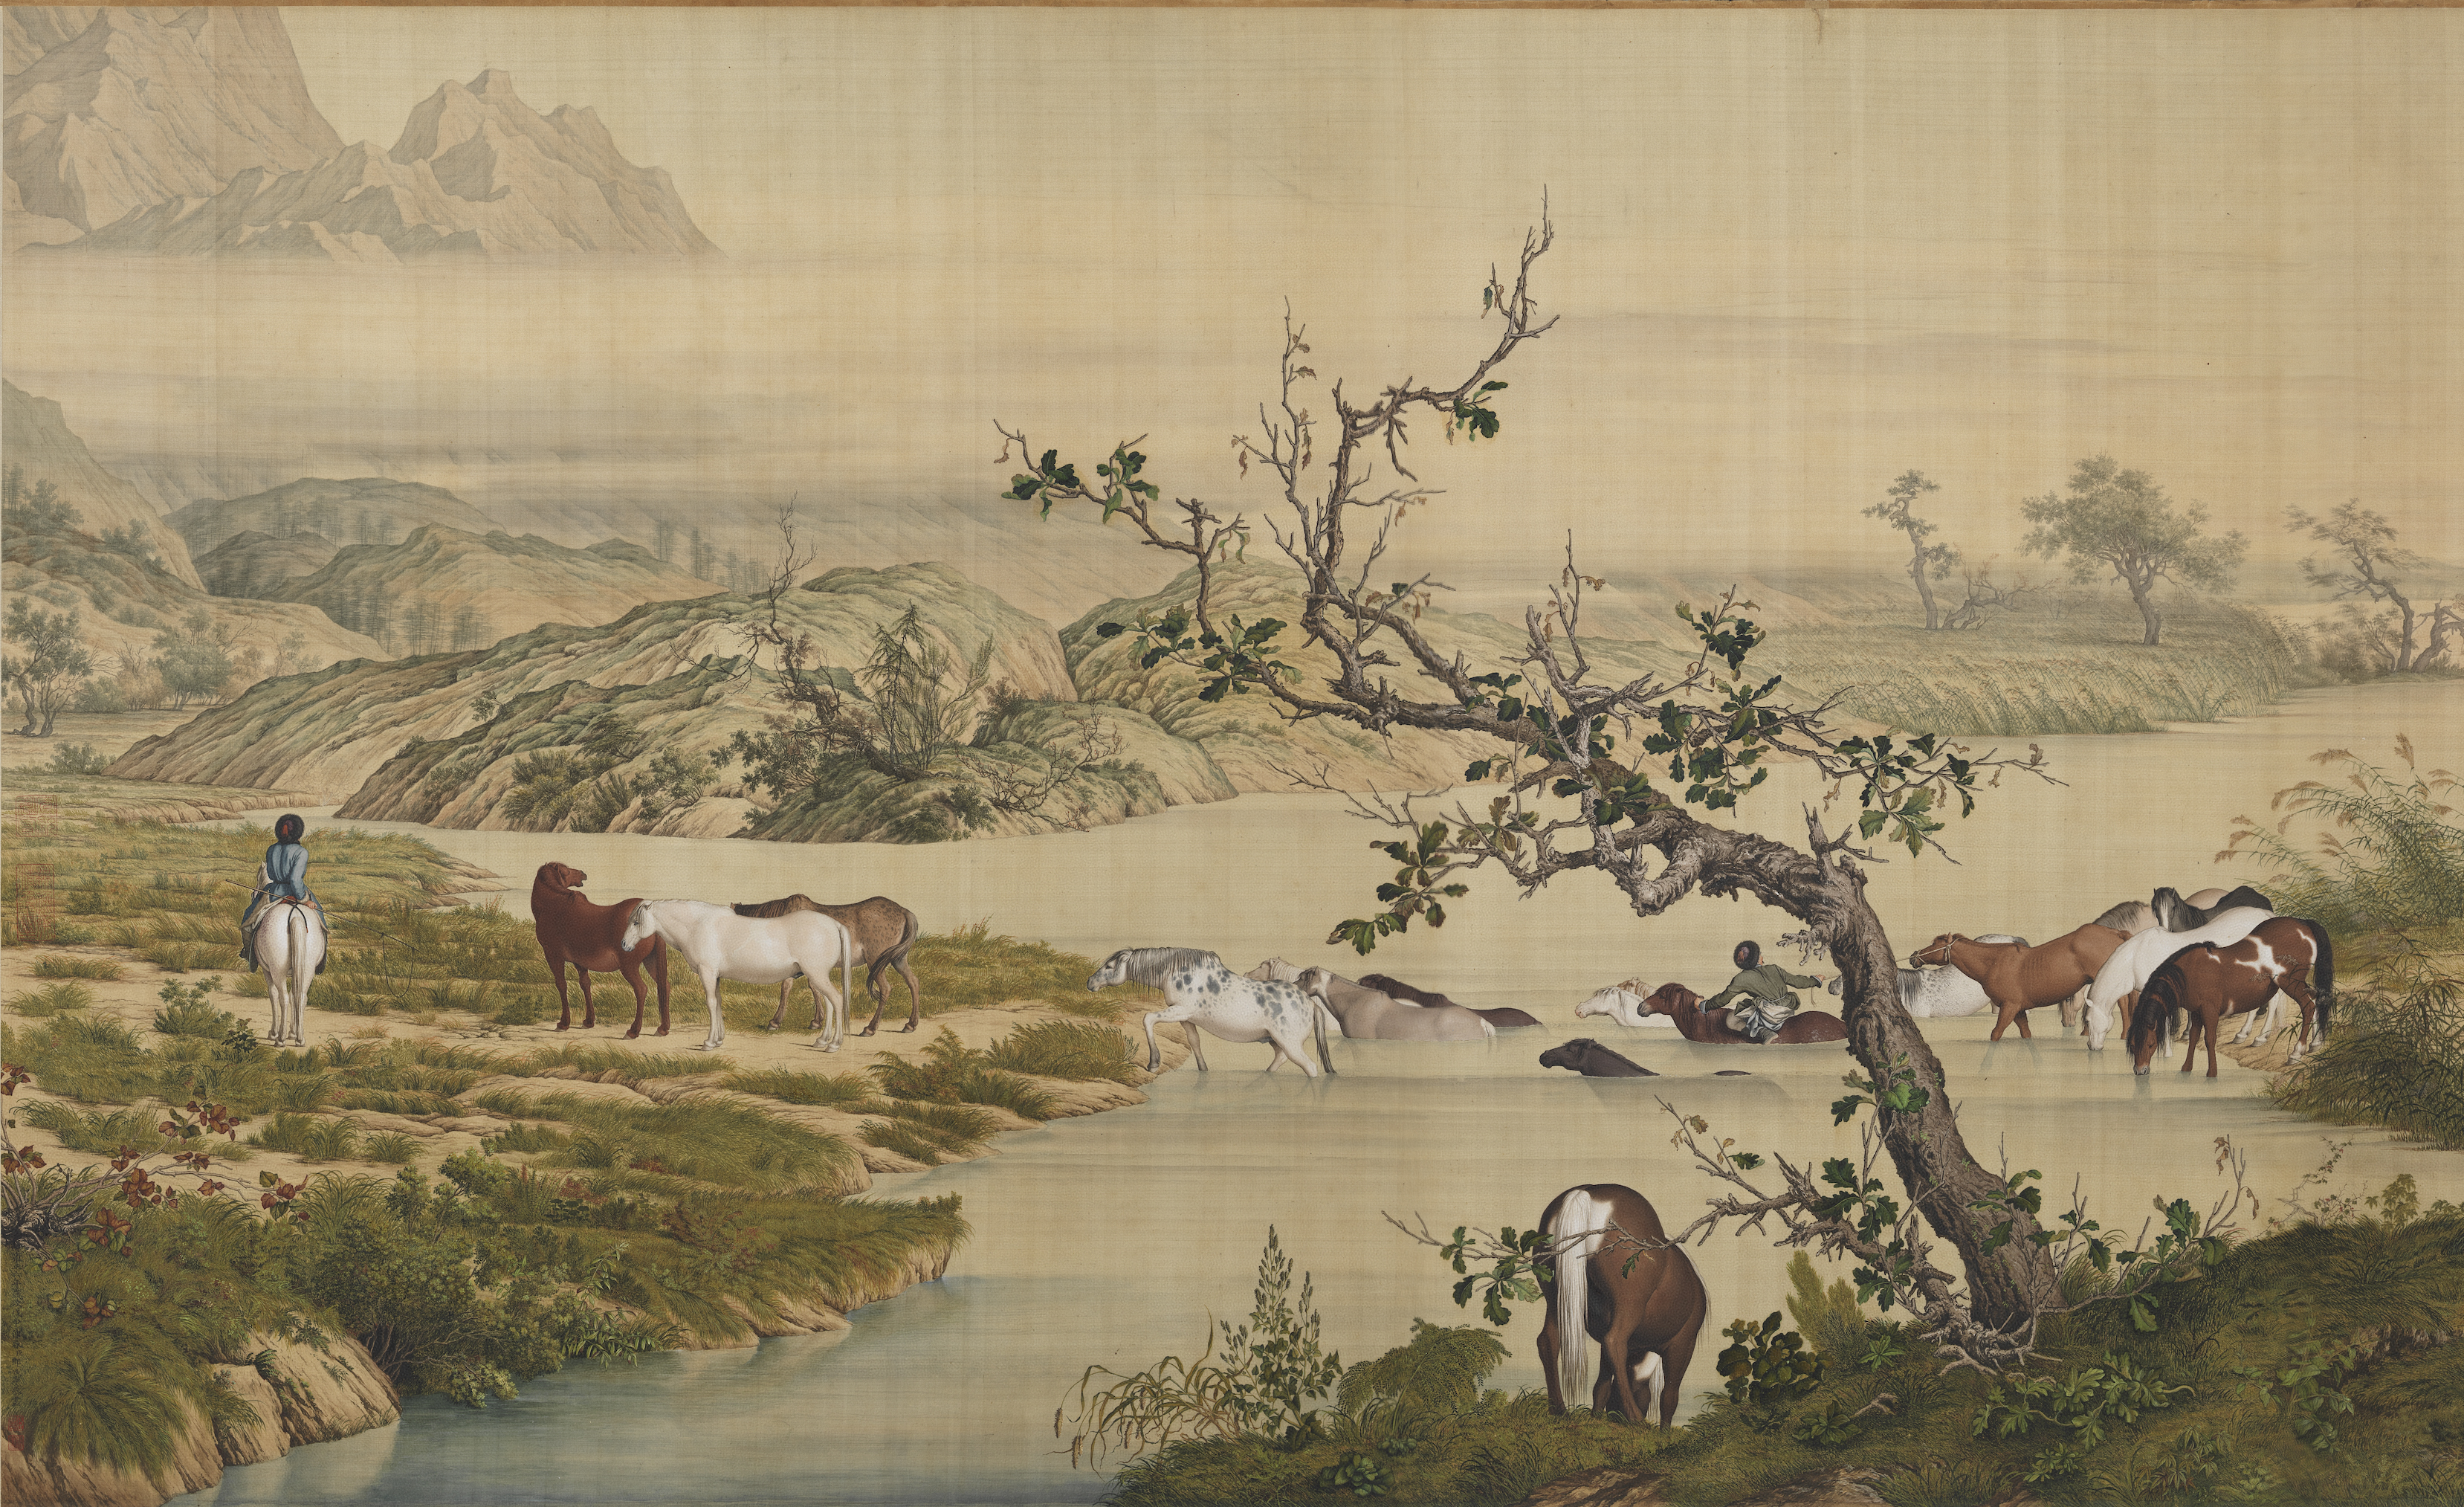 Painting in National Palace Museum, Qing dynasty (1644-1911) part2